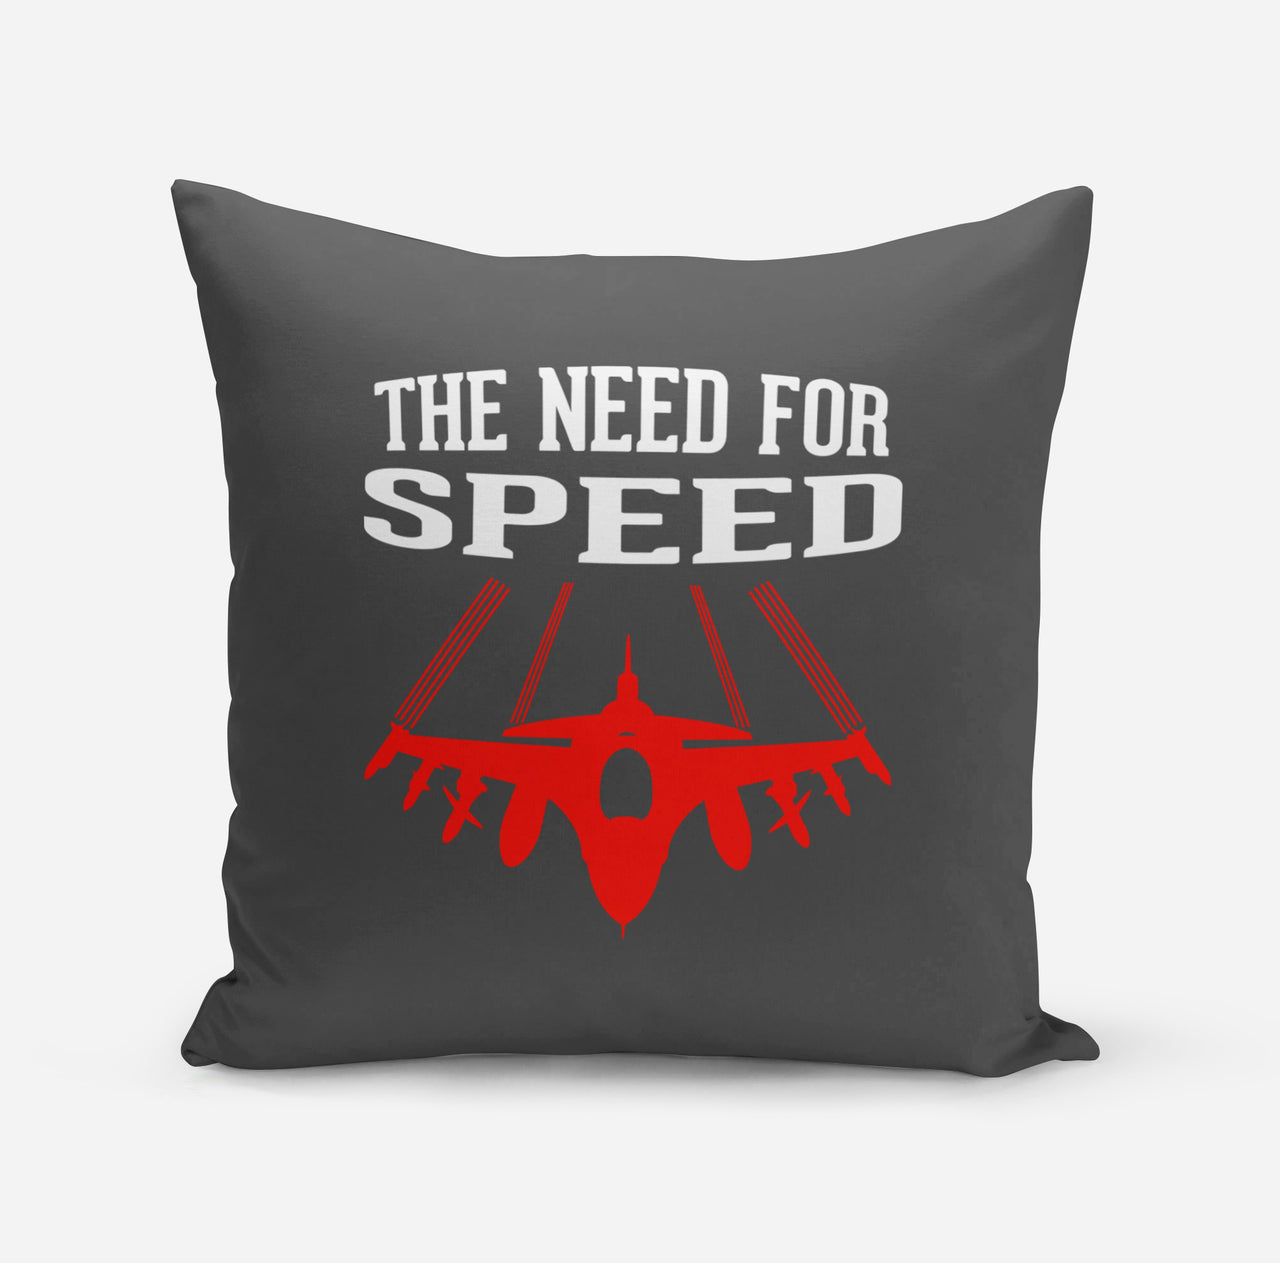 The Need For Speed Designed Pillows